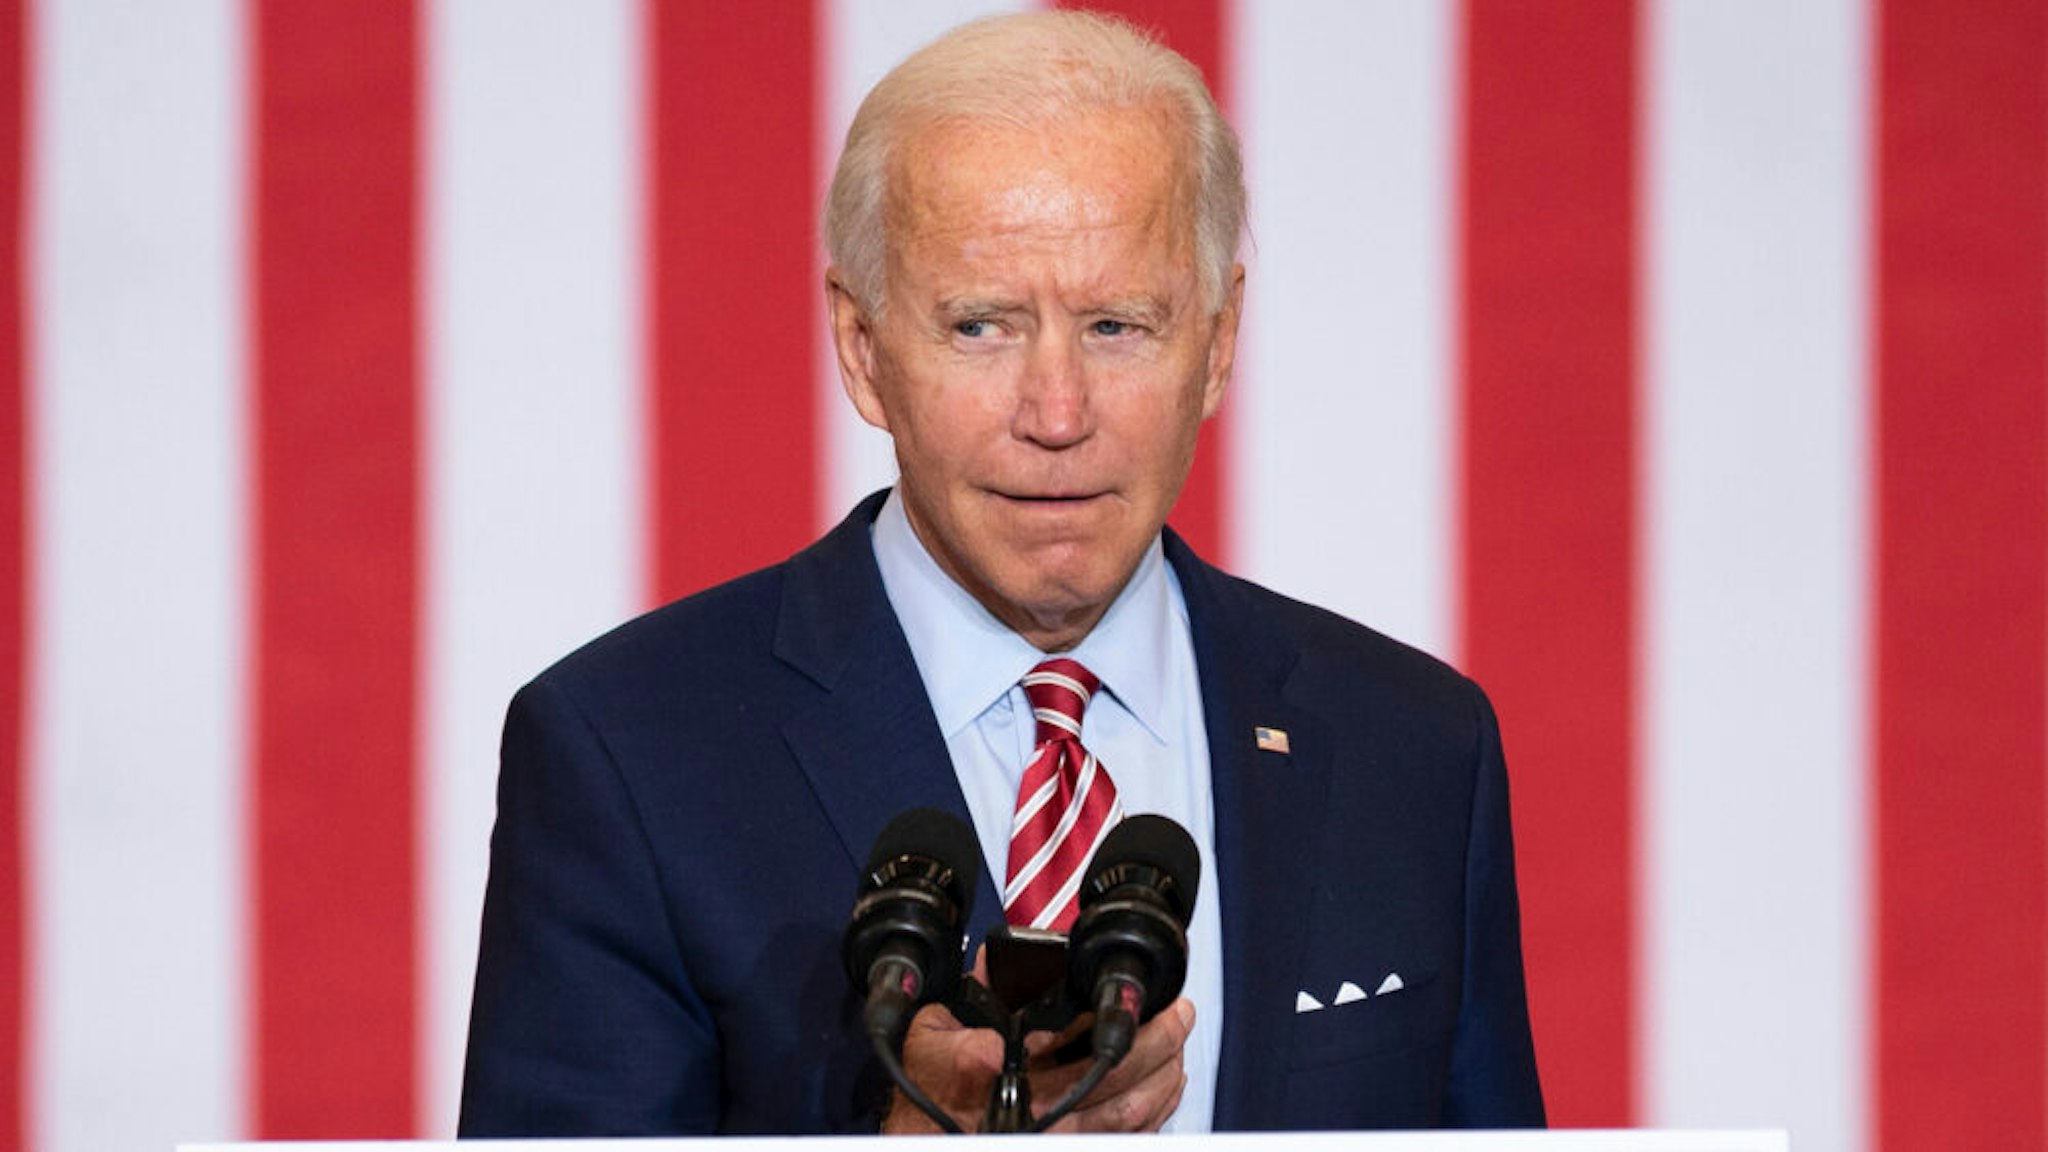 Democratic Presidential Candidate Joe Biden plays music from his cell phone as he participates in a Hispanic Heritage Month event at the Osceola Heritage Park in Kissimmee, Florida on September 15, 2020.